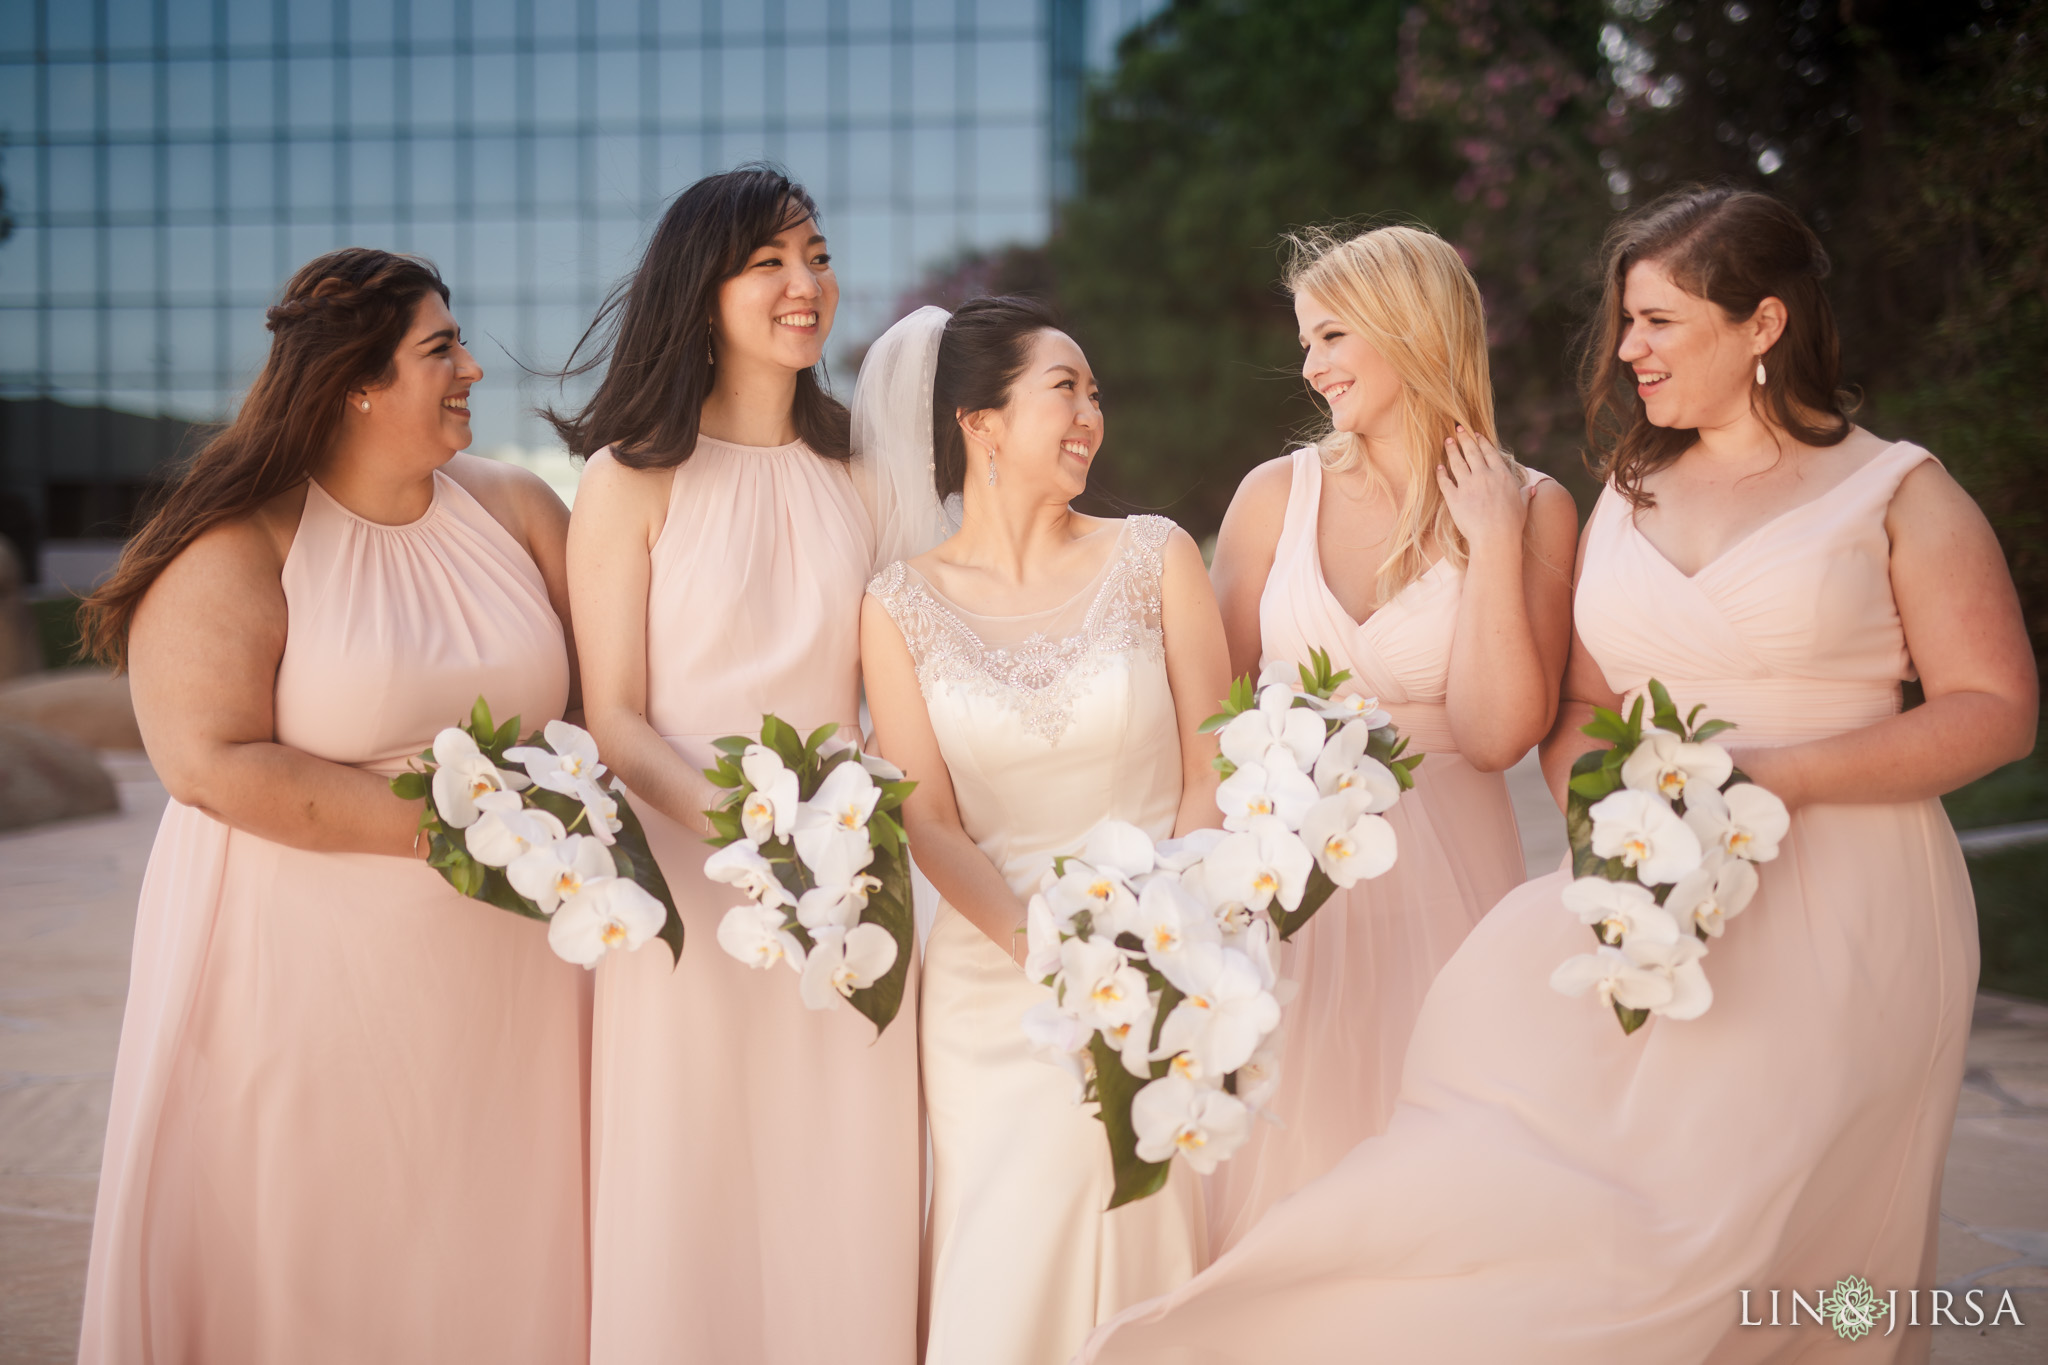 16 segerstrom center for the arts costa mesa wedding photography